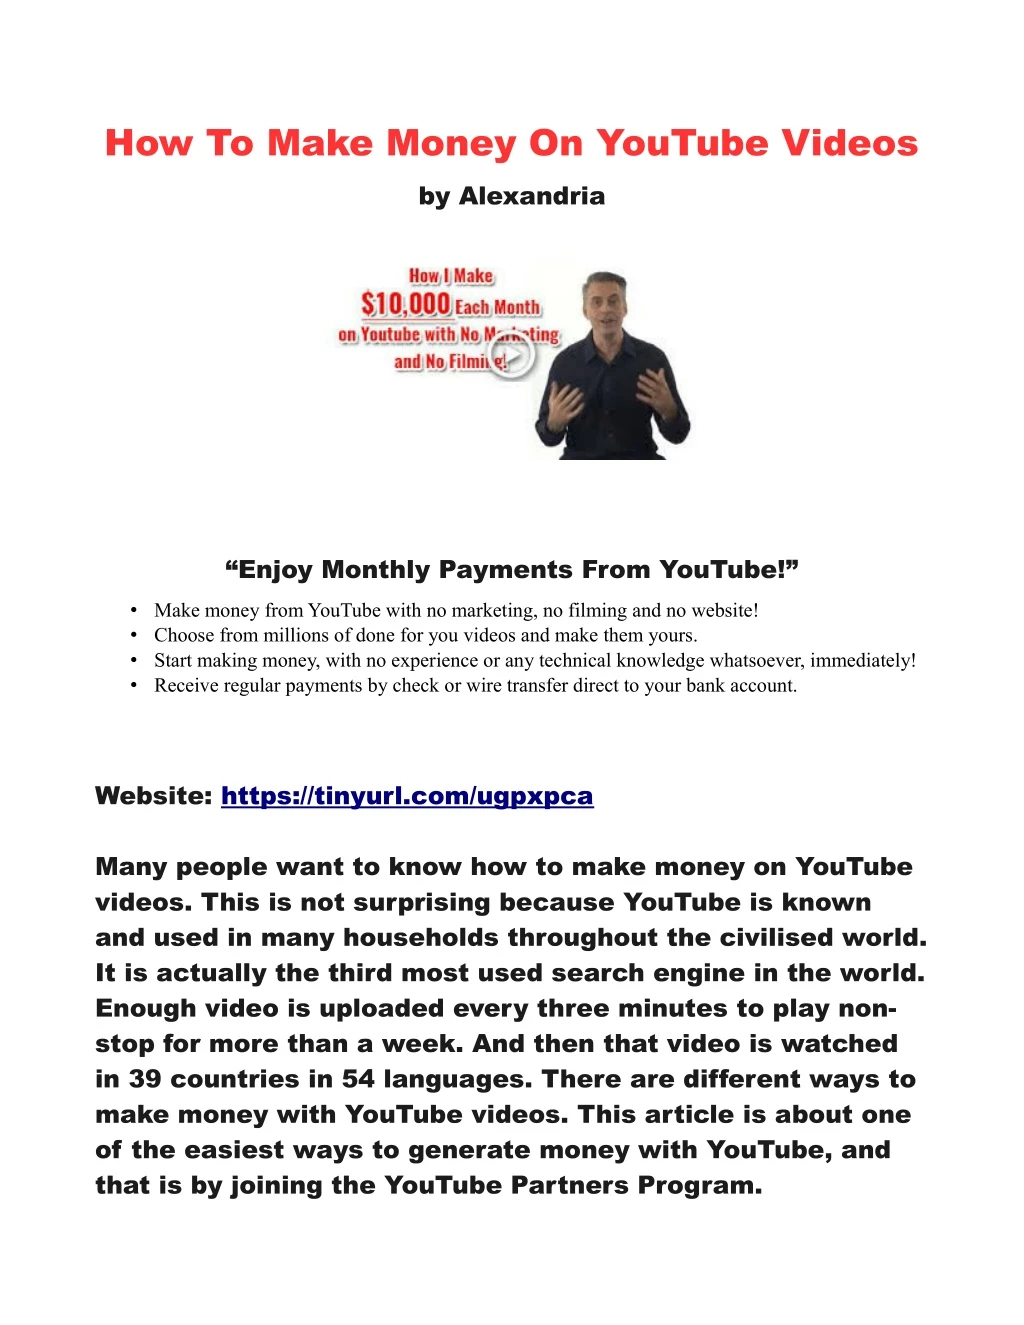 how to make money on youtube videos by alexandria